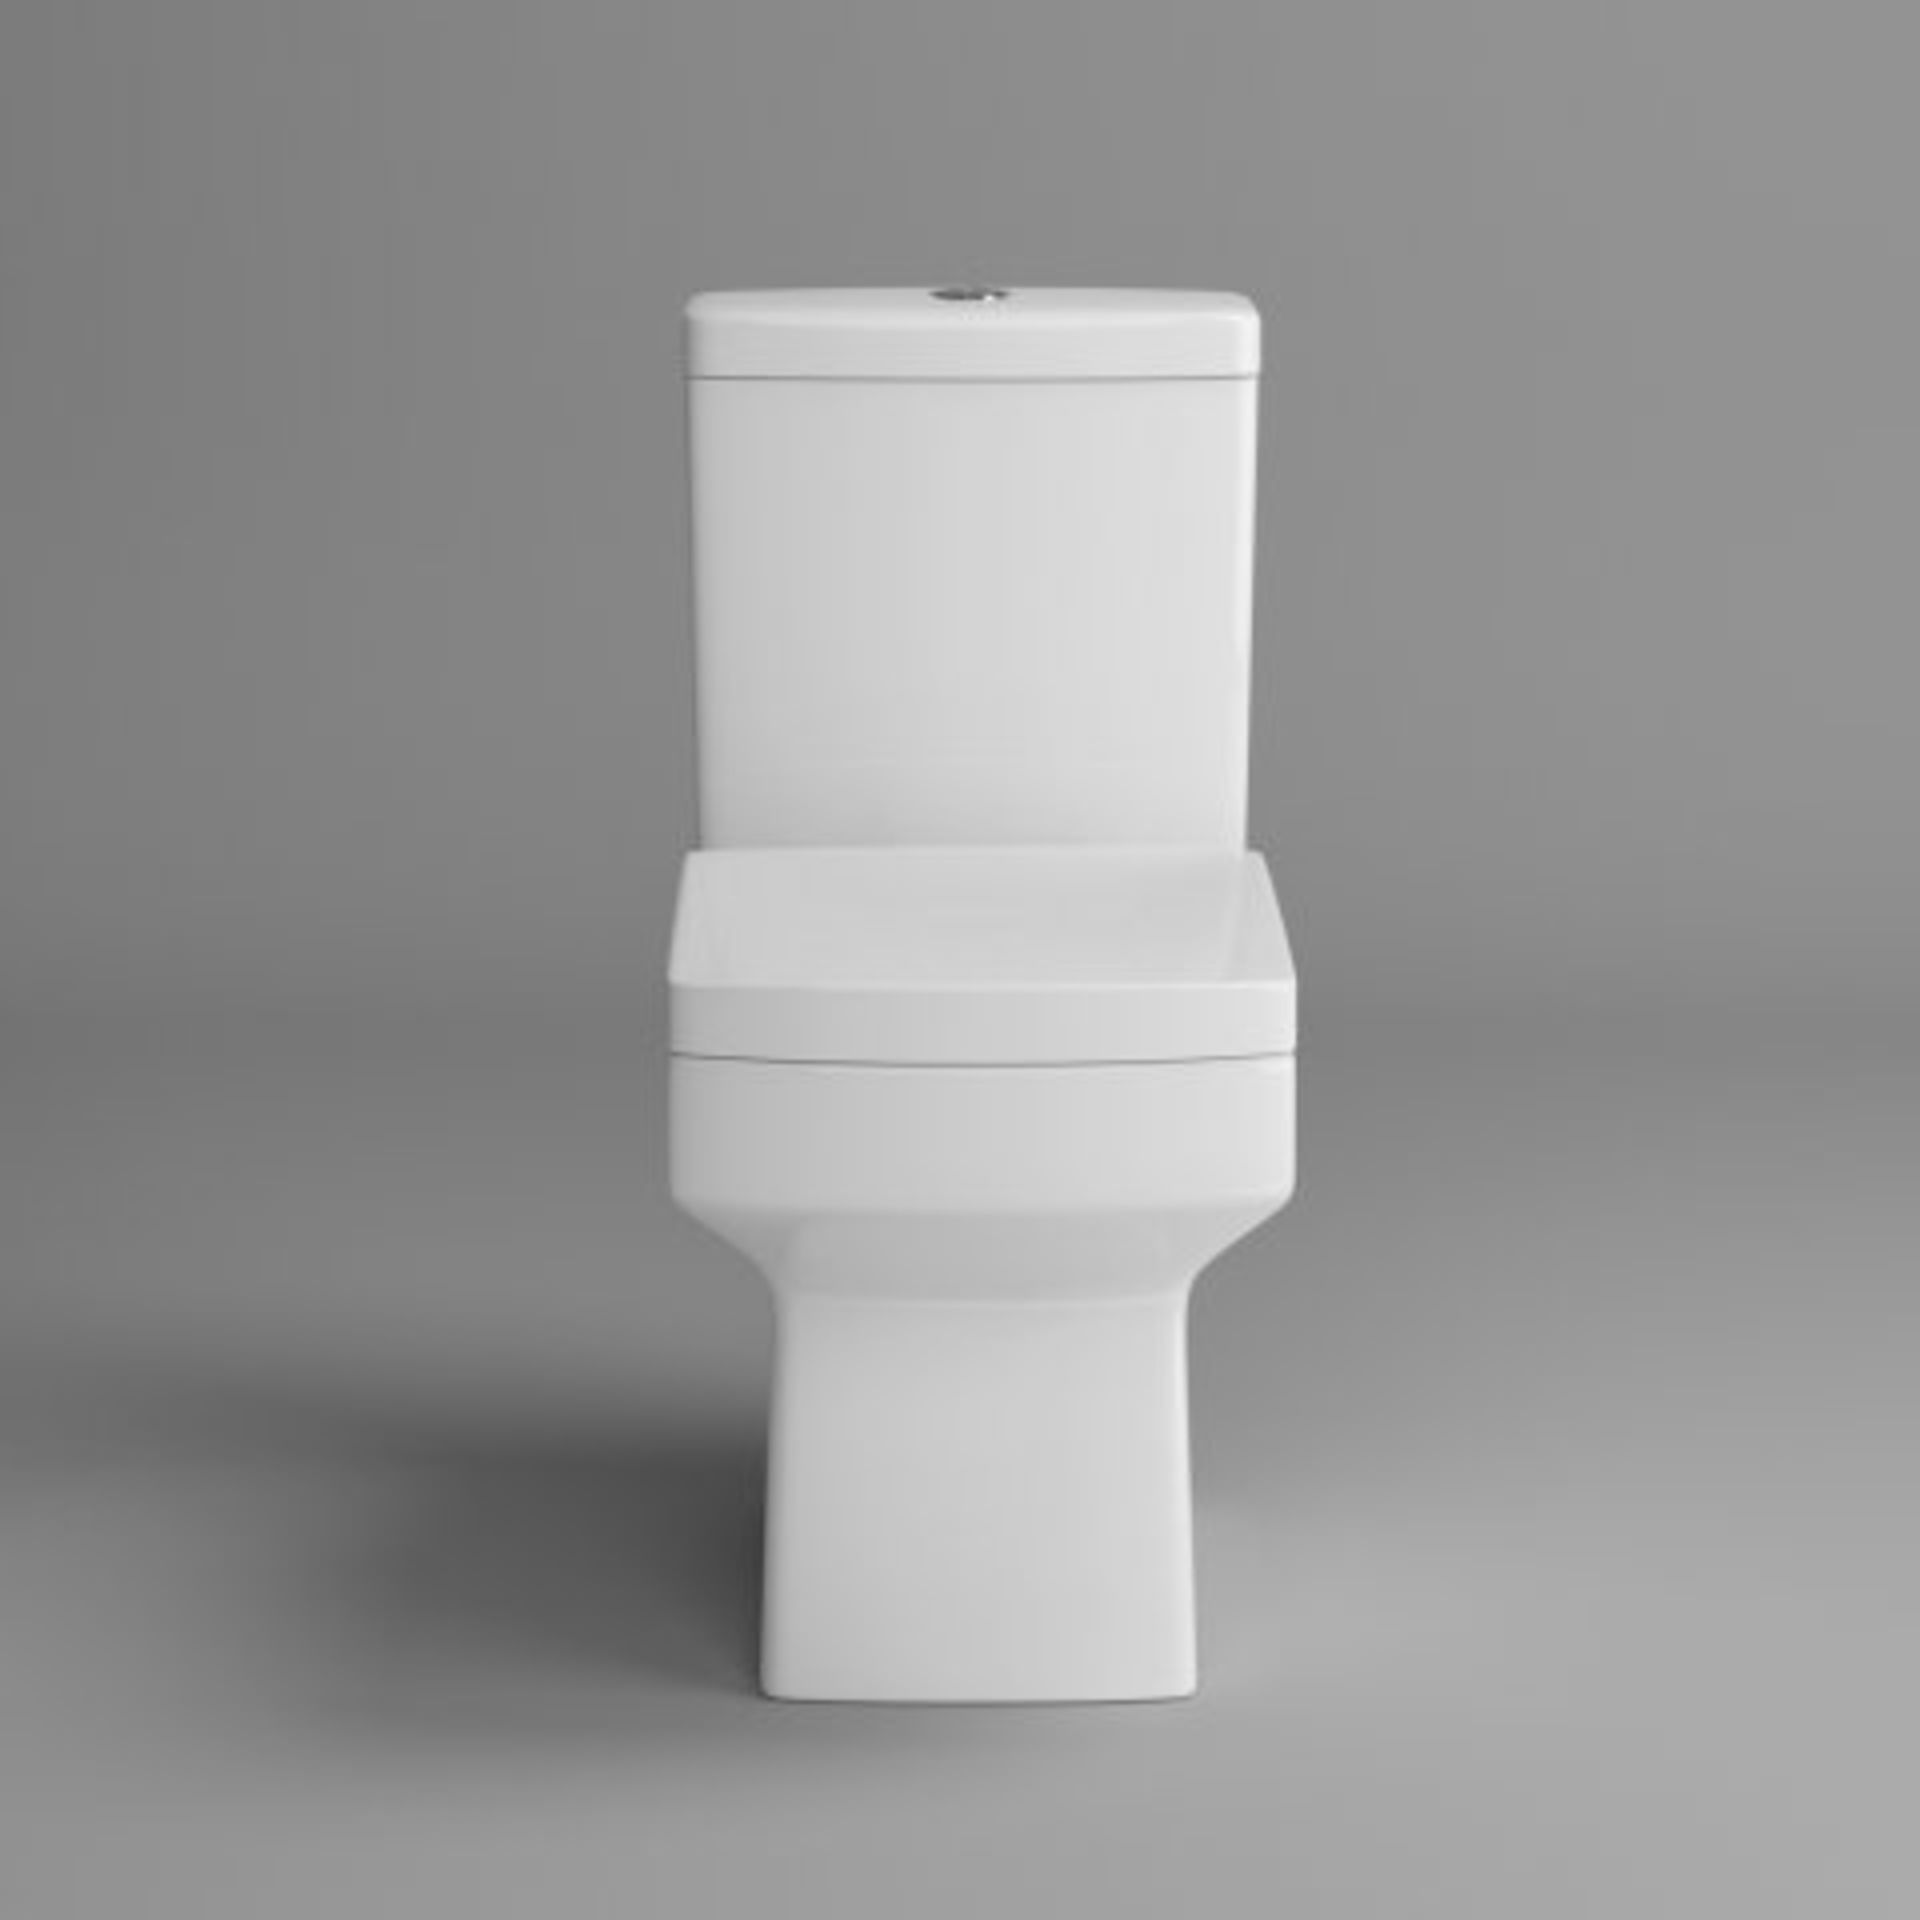 NEW & BOXED Belfort Close Coupled Toilet & Cistern inc Soft Close Seat. RRP £499.99.CC645.Long... - Image 2 of 3